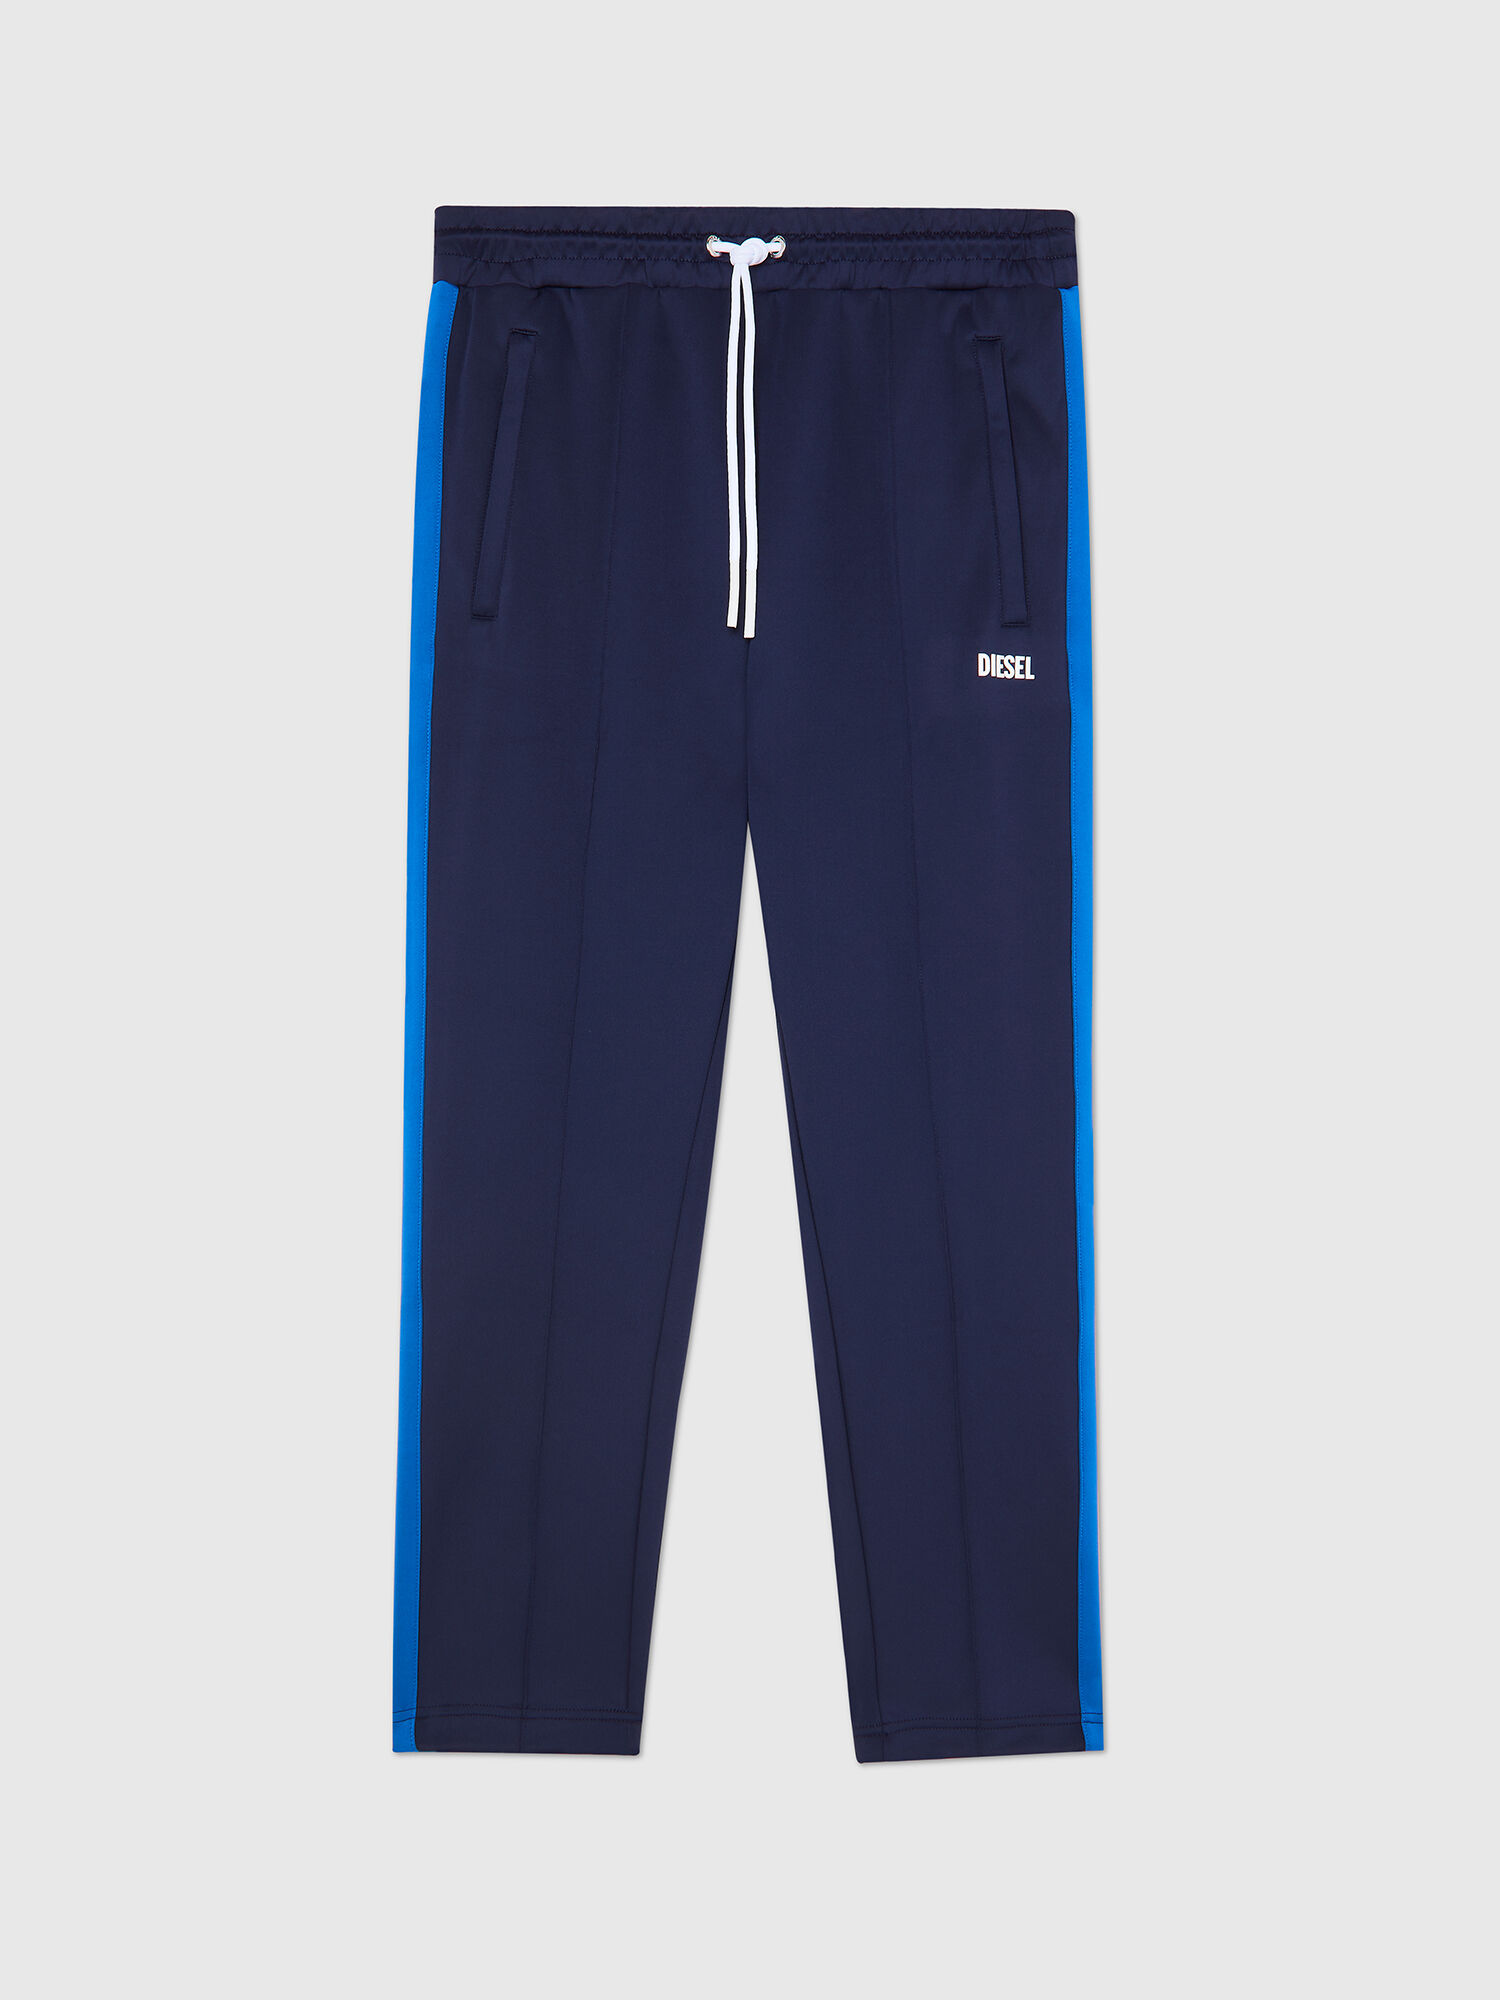 P-CHROME Man: Sweatpants with side bands | Diesel